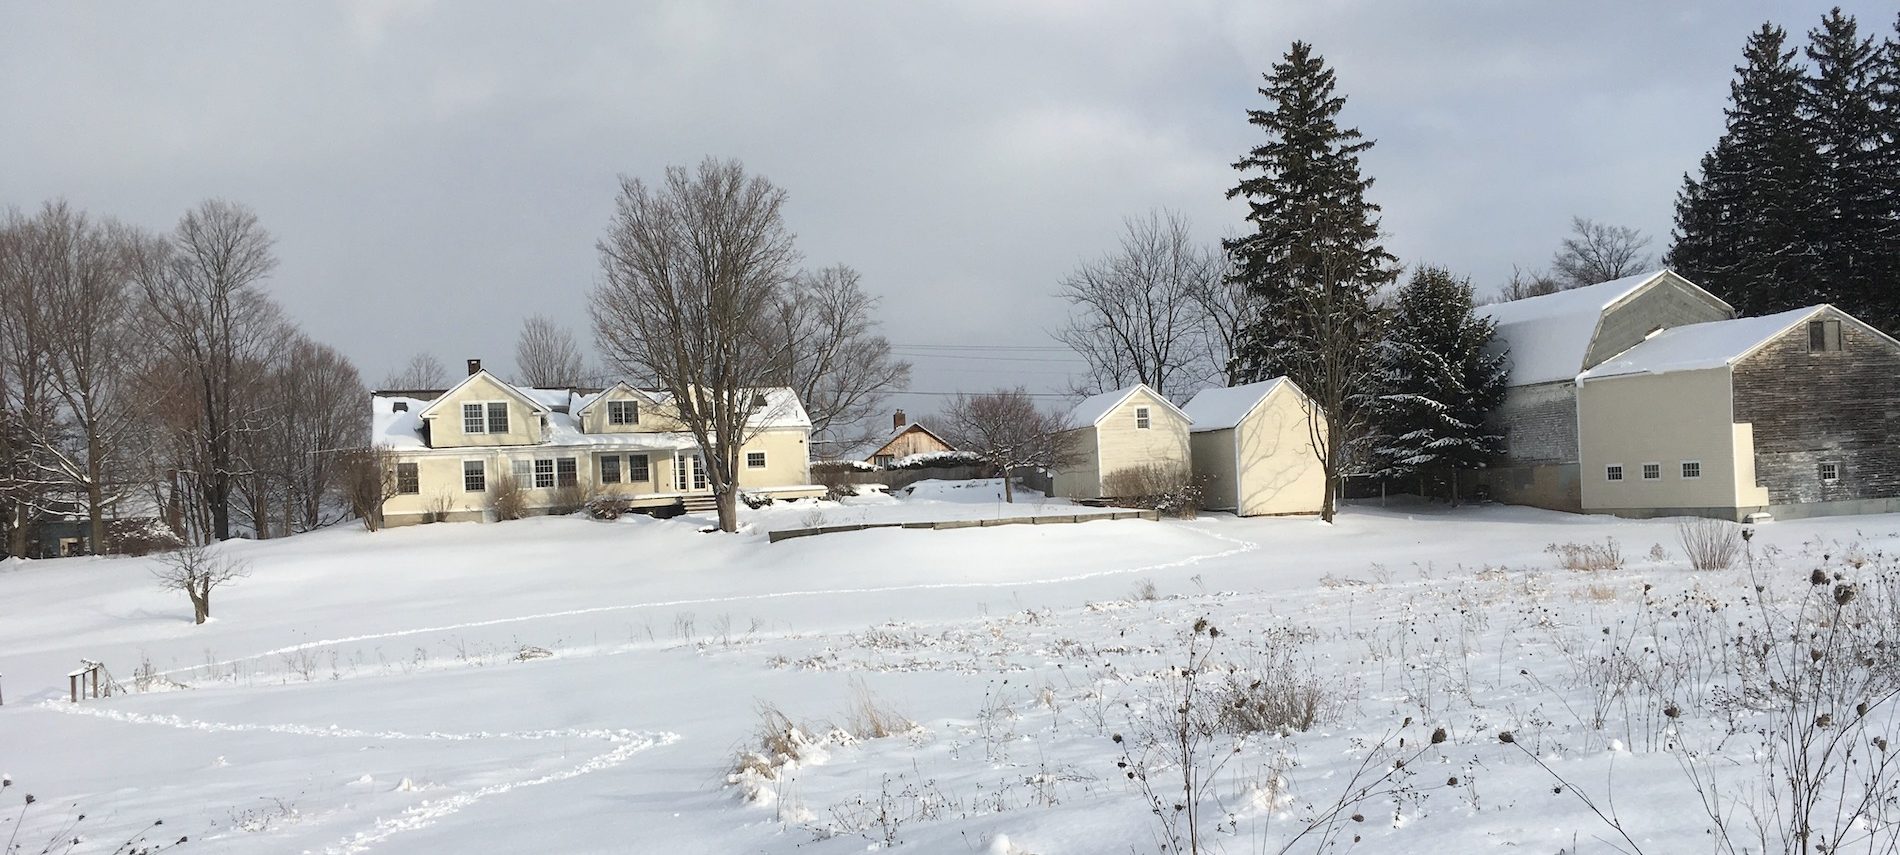 View of the yellow house and outbuildings, and a gray barn in the snow in the distance.